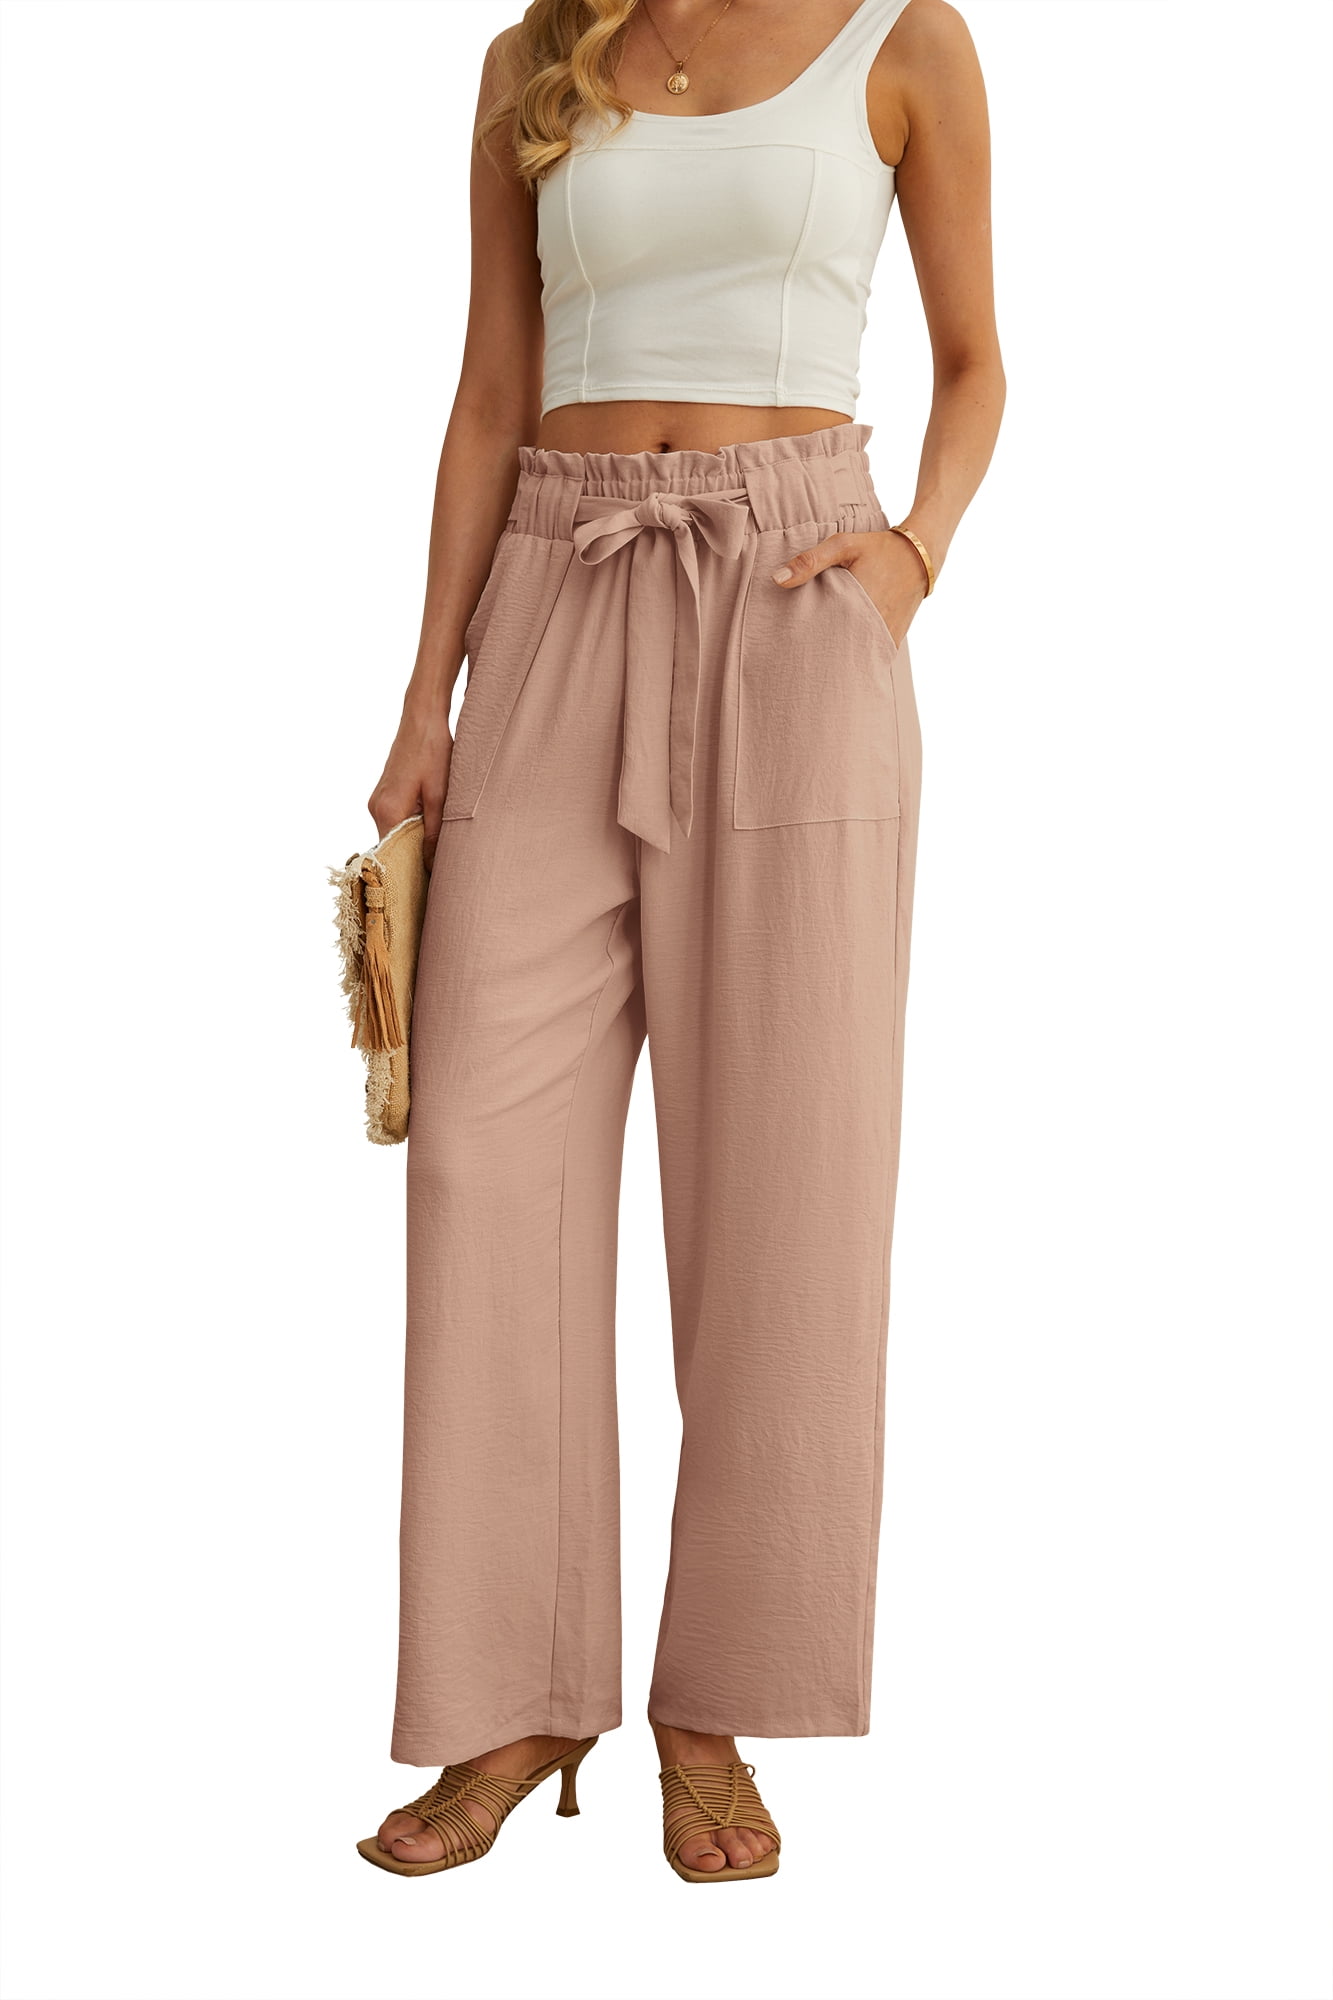 JWD Women's Wide Leg Pants With Pockets High Waist Adjustable Knot Loose  Casual Trousers Business Work Casual Pants Khaki XX-Large 